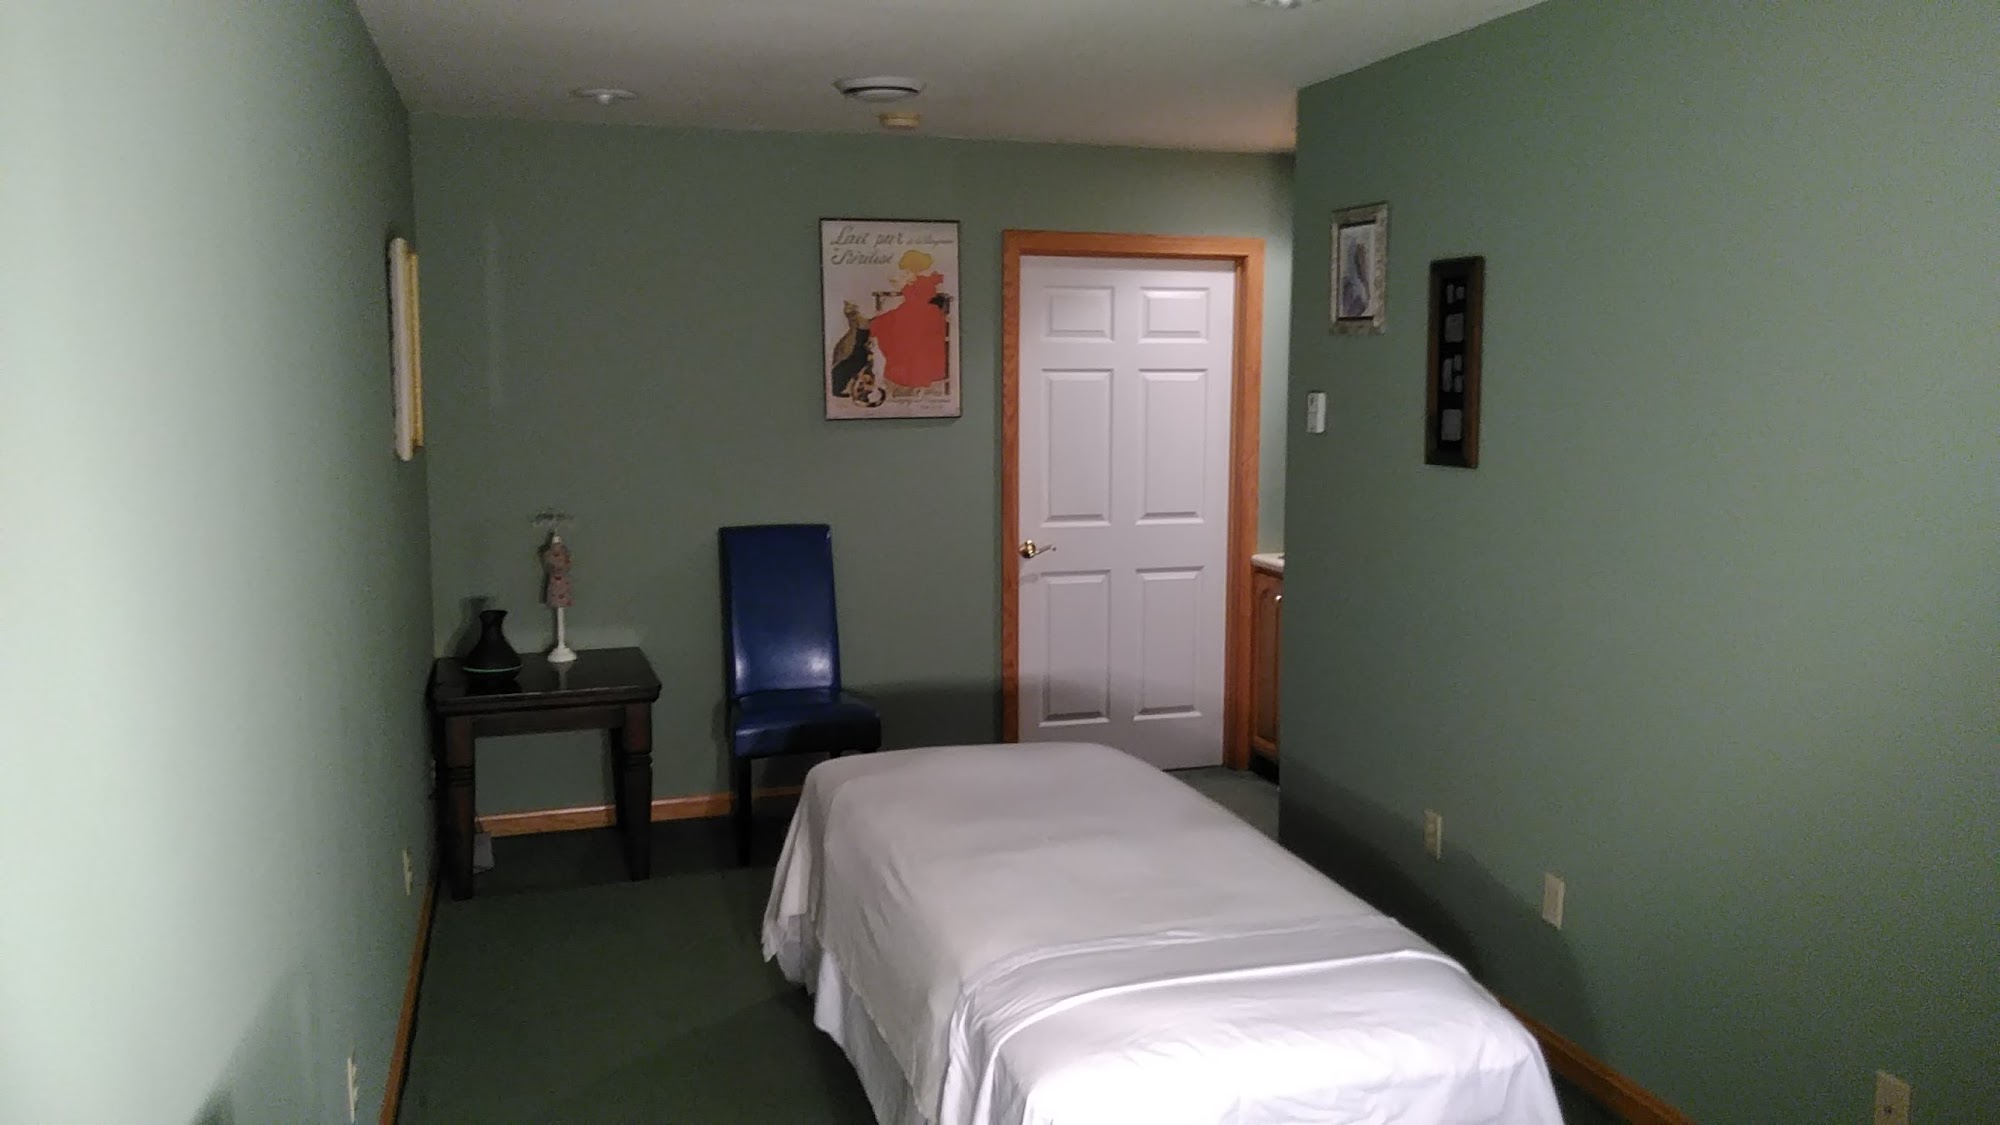 Thorp's Therapy is Massage 11065 PA-18 #5, Conneaut Lake Pennsylvania 16316